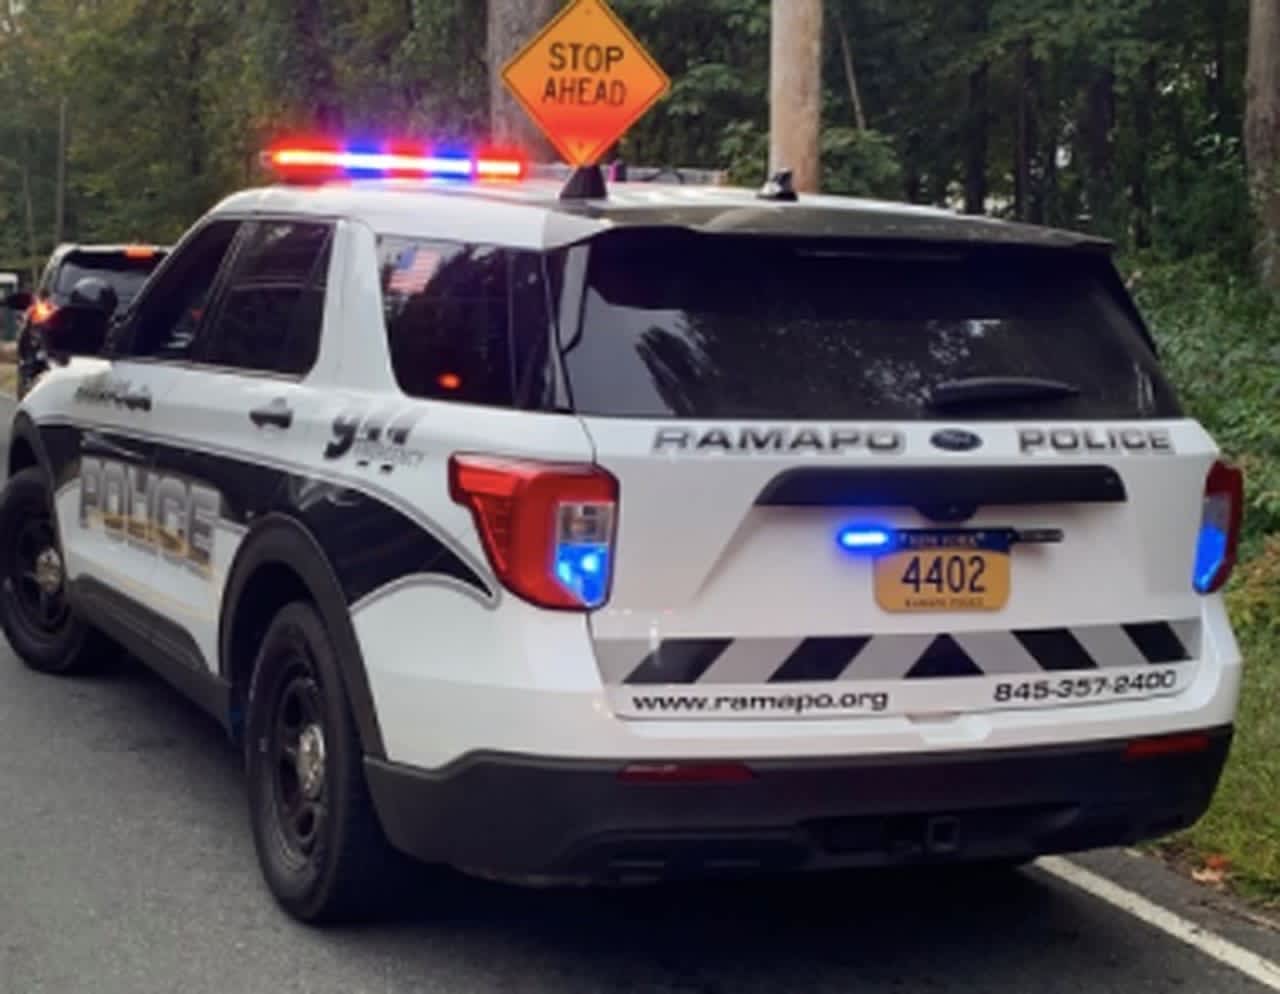 An area woman was arrested for allegedly beating a man's car with a metal bat and then stealing his cell phone during a road rage incident in Ramapo.